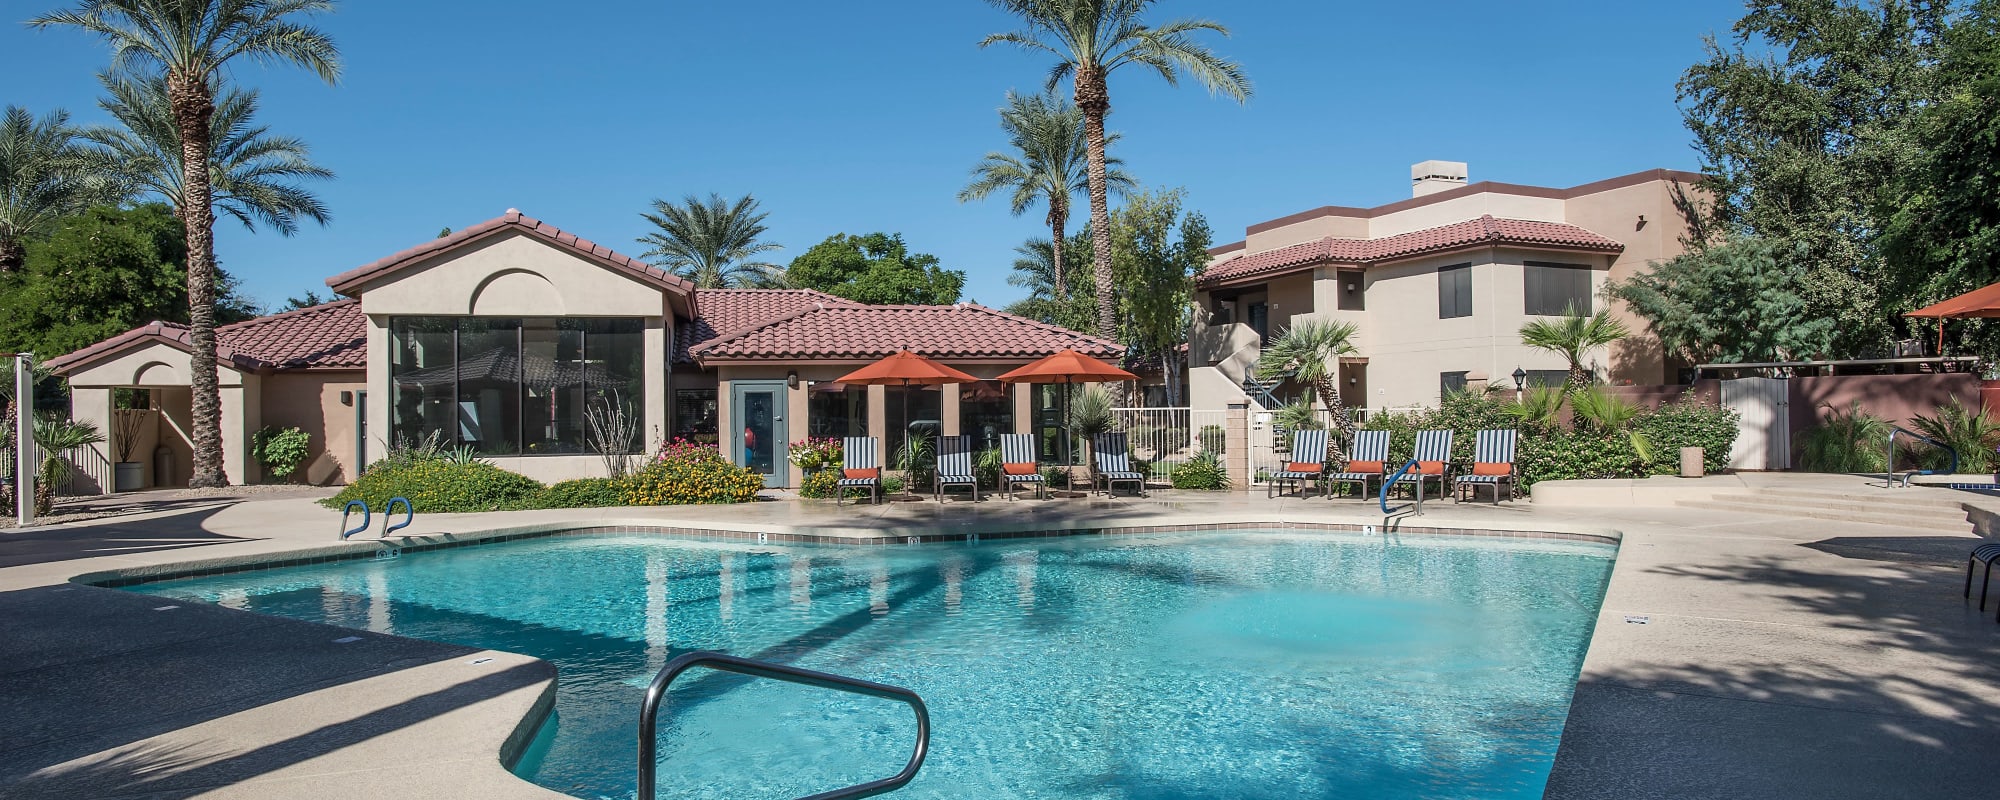 Privacy policy at Scottsdale Highlands Apartments in Scottsdale, Arizona